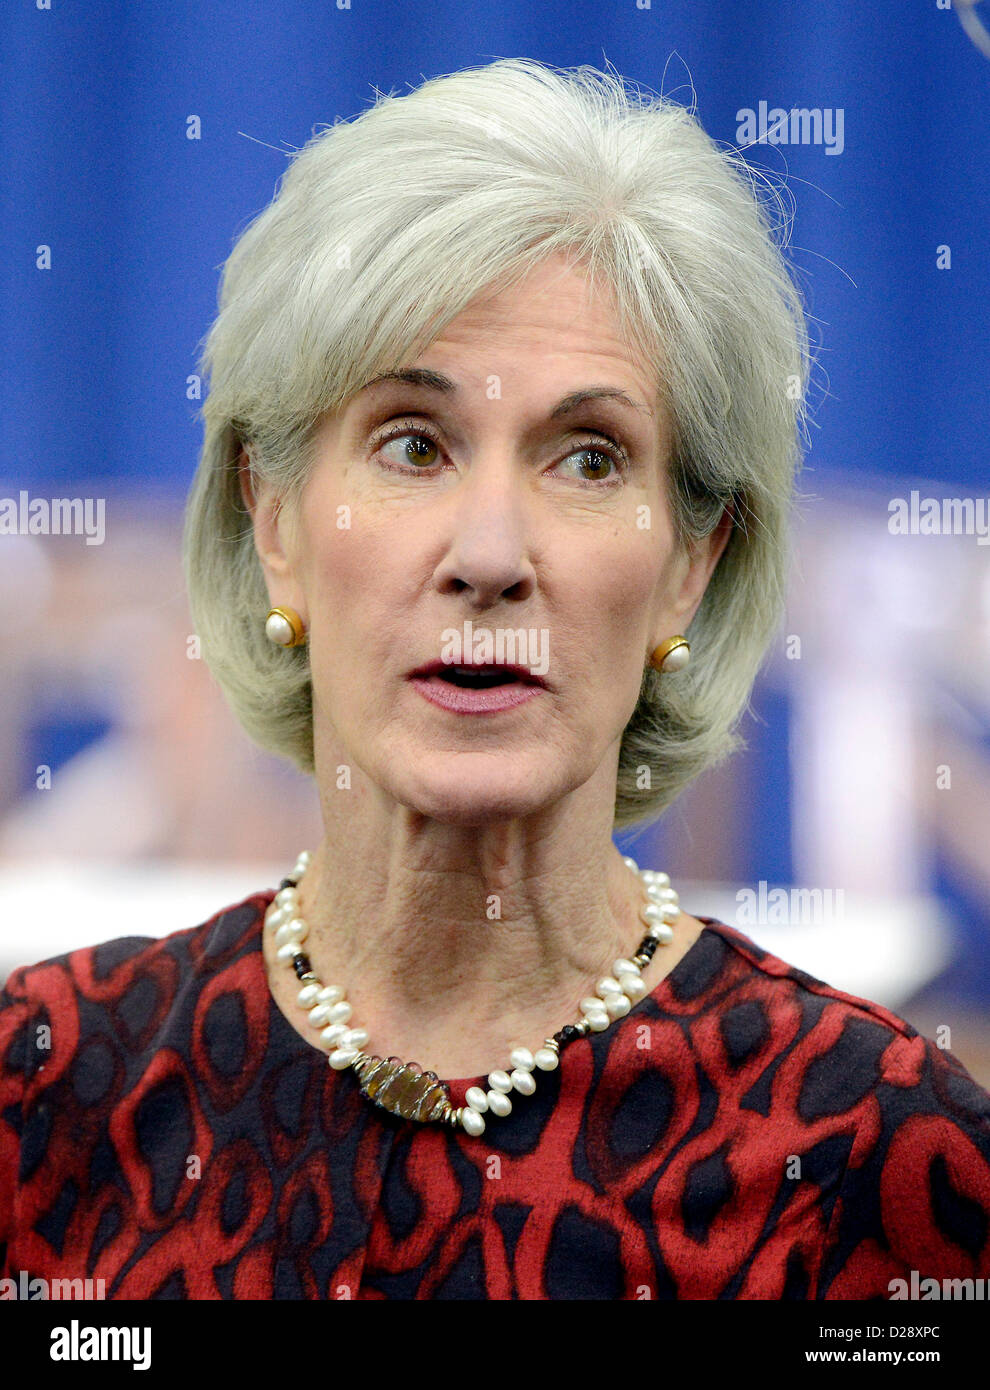 United States Secretary of Health and Human Services Kathleen Sebelius attends the remarks of U.S. President Barack Obama and Vice President Joe Biden at an event at the White House in Washington, D.C. to unveil a set of proposals to reduce gun violence on Wednesday, January 16, 2012. .Credit: Ron Sachs / CNP Stock Photo